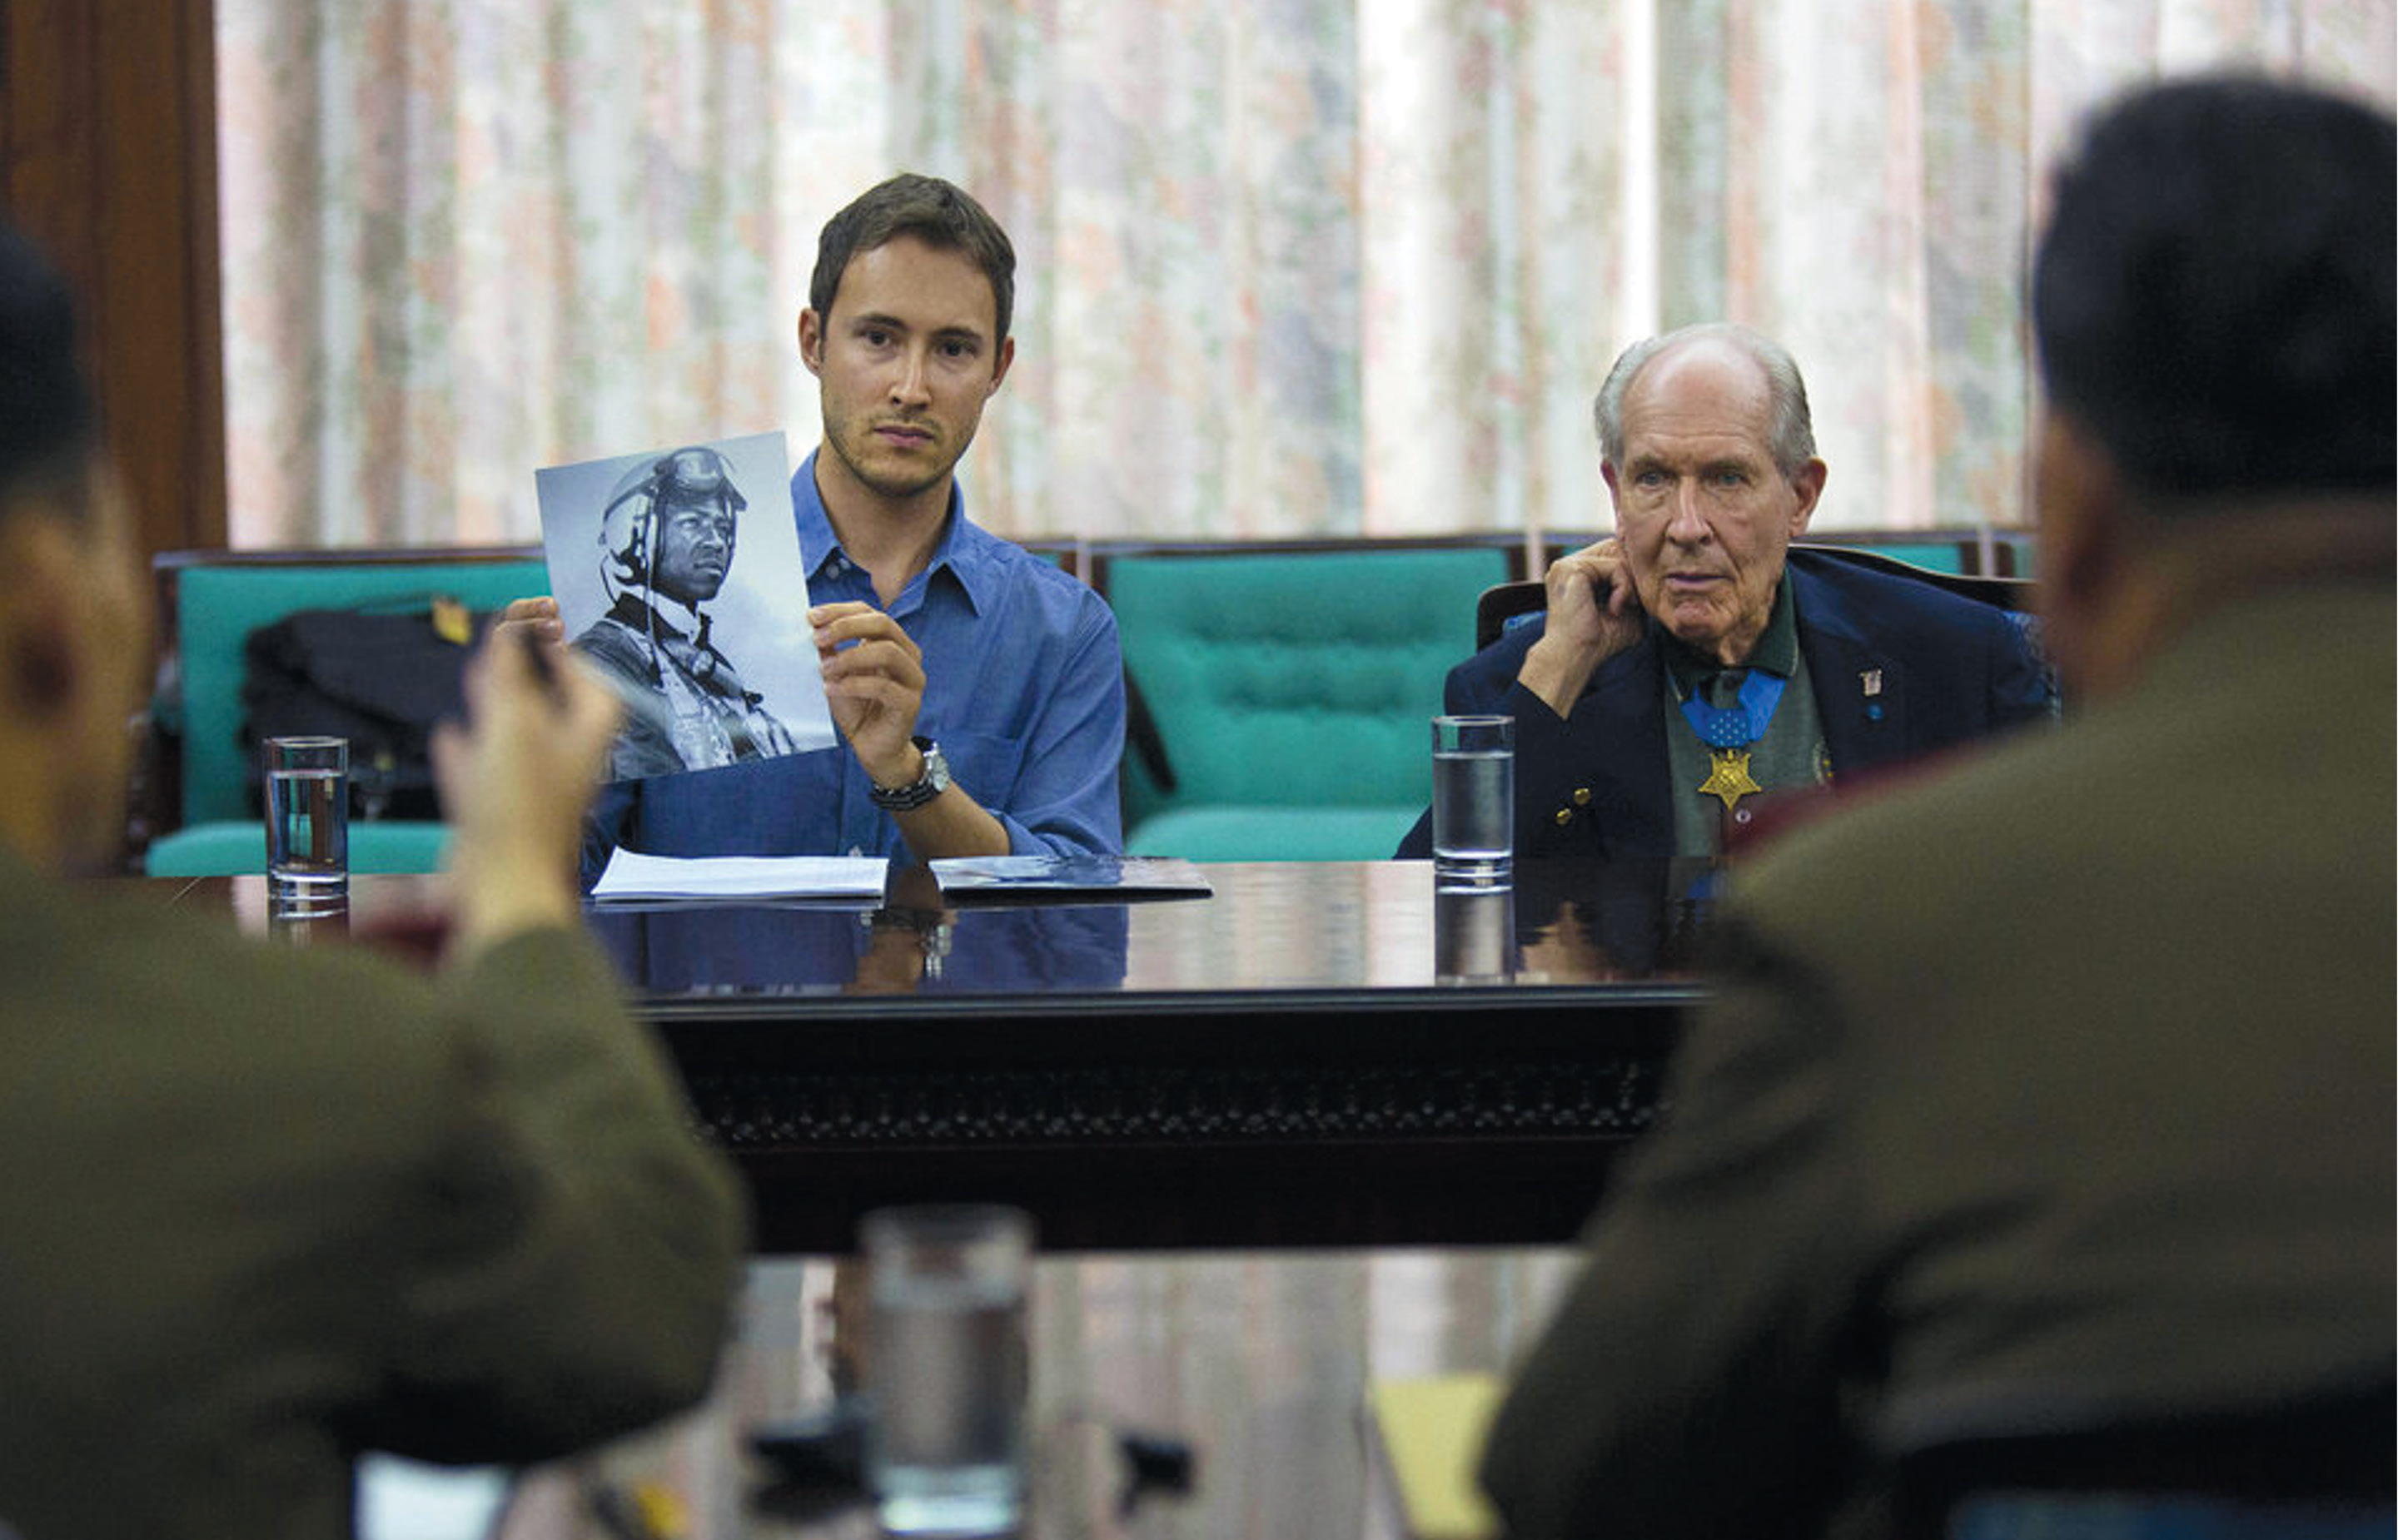 Adam Makos, left, author of Devotion: An Epic Story of Heroism, Friendship, and Sacrifice, holds up a photo of Jesse Brown in a meeting with officials in North Korea in 2013 while Thomas J. Hudner Jr., right, looks on.